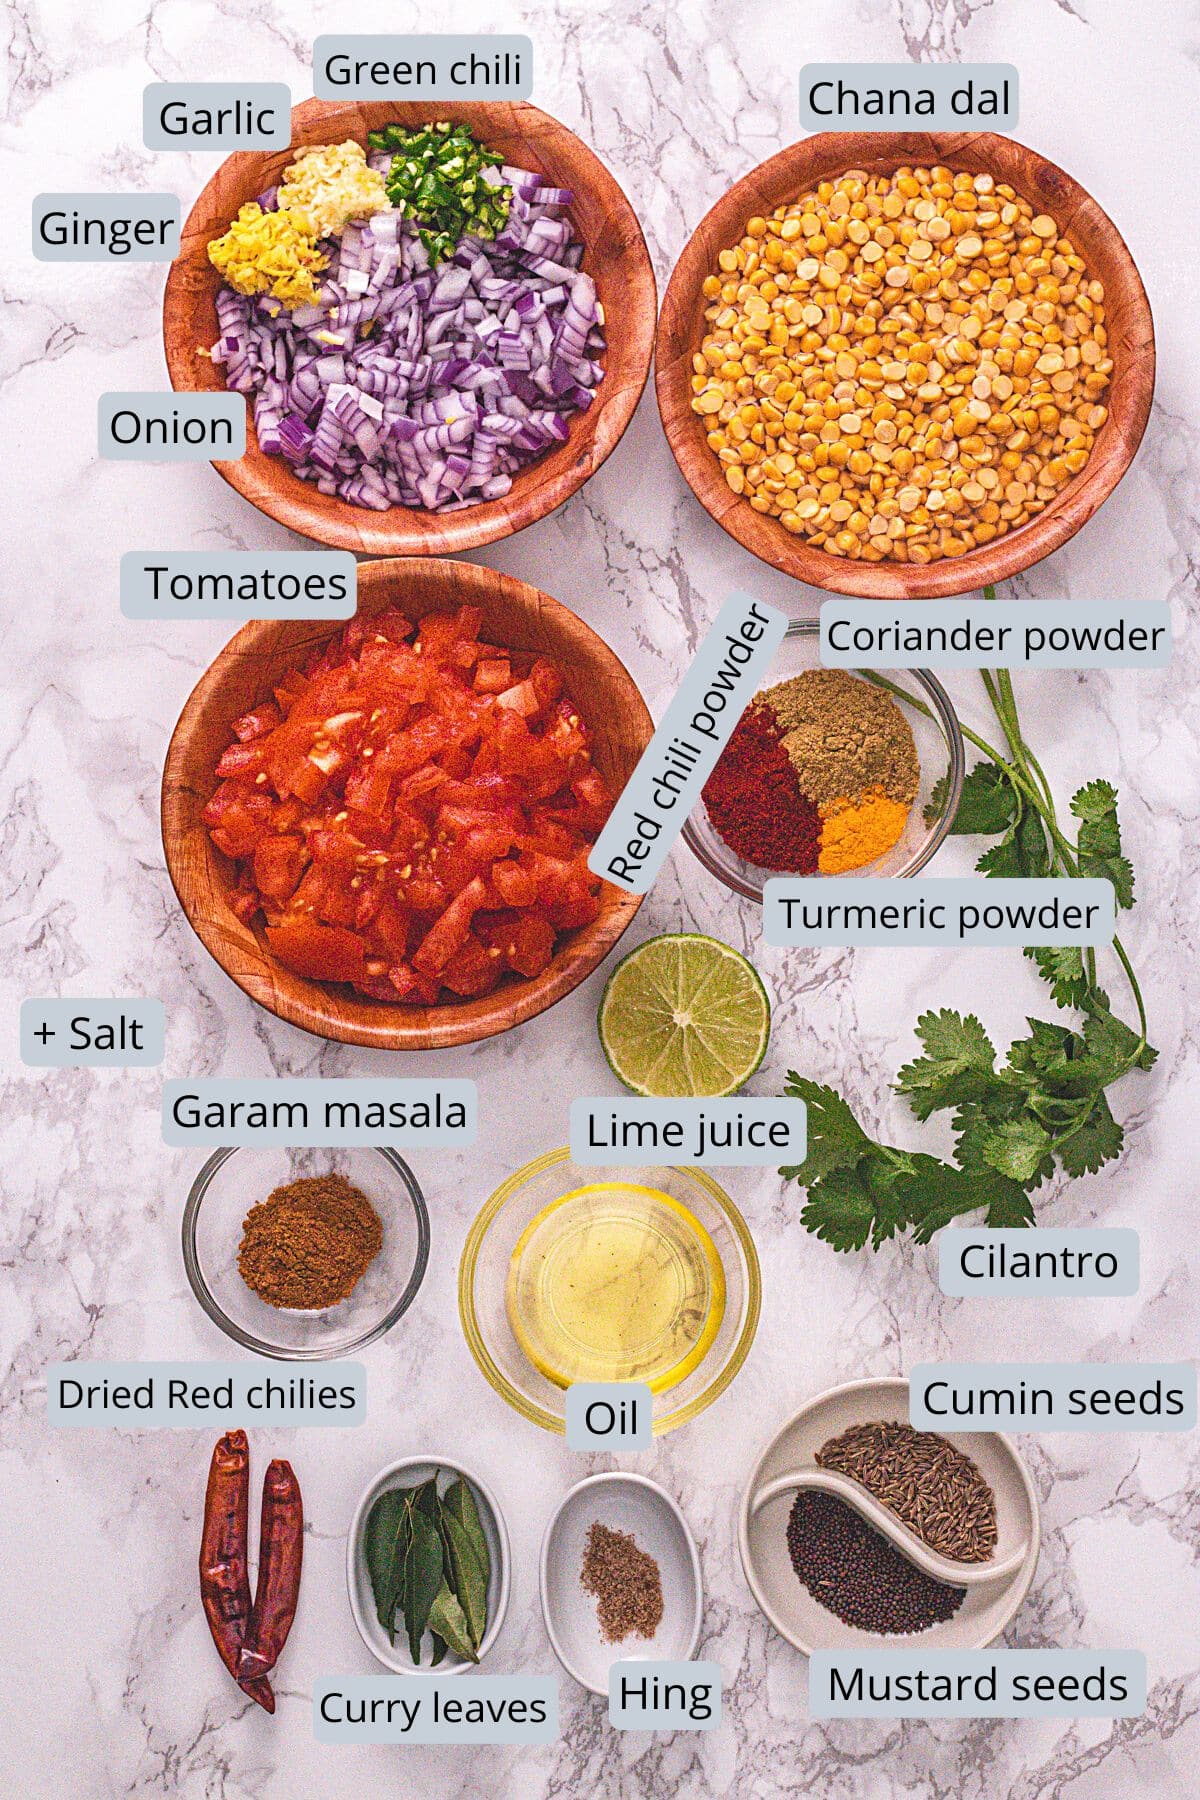 Chana dal recipe ingredients in bowls with labels.